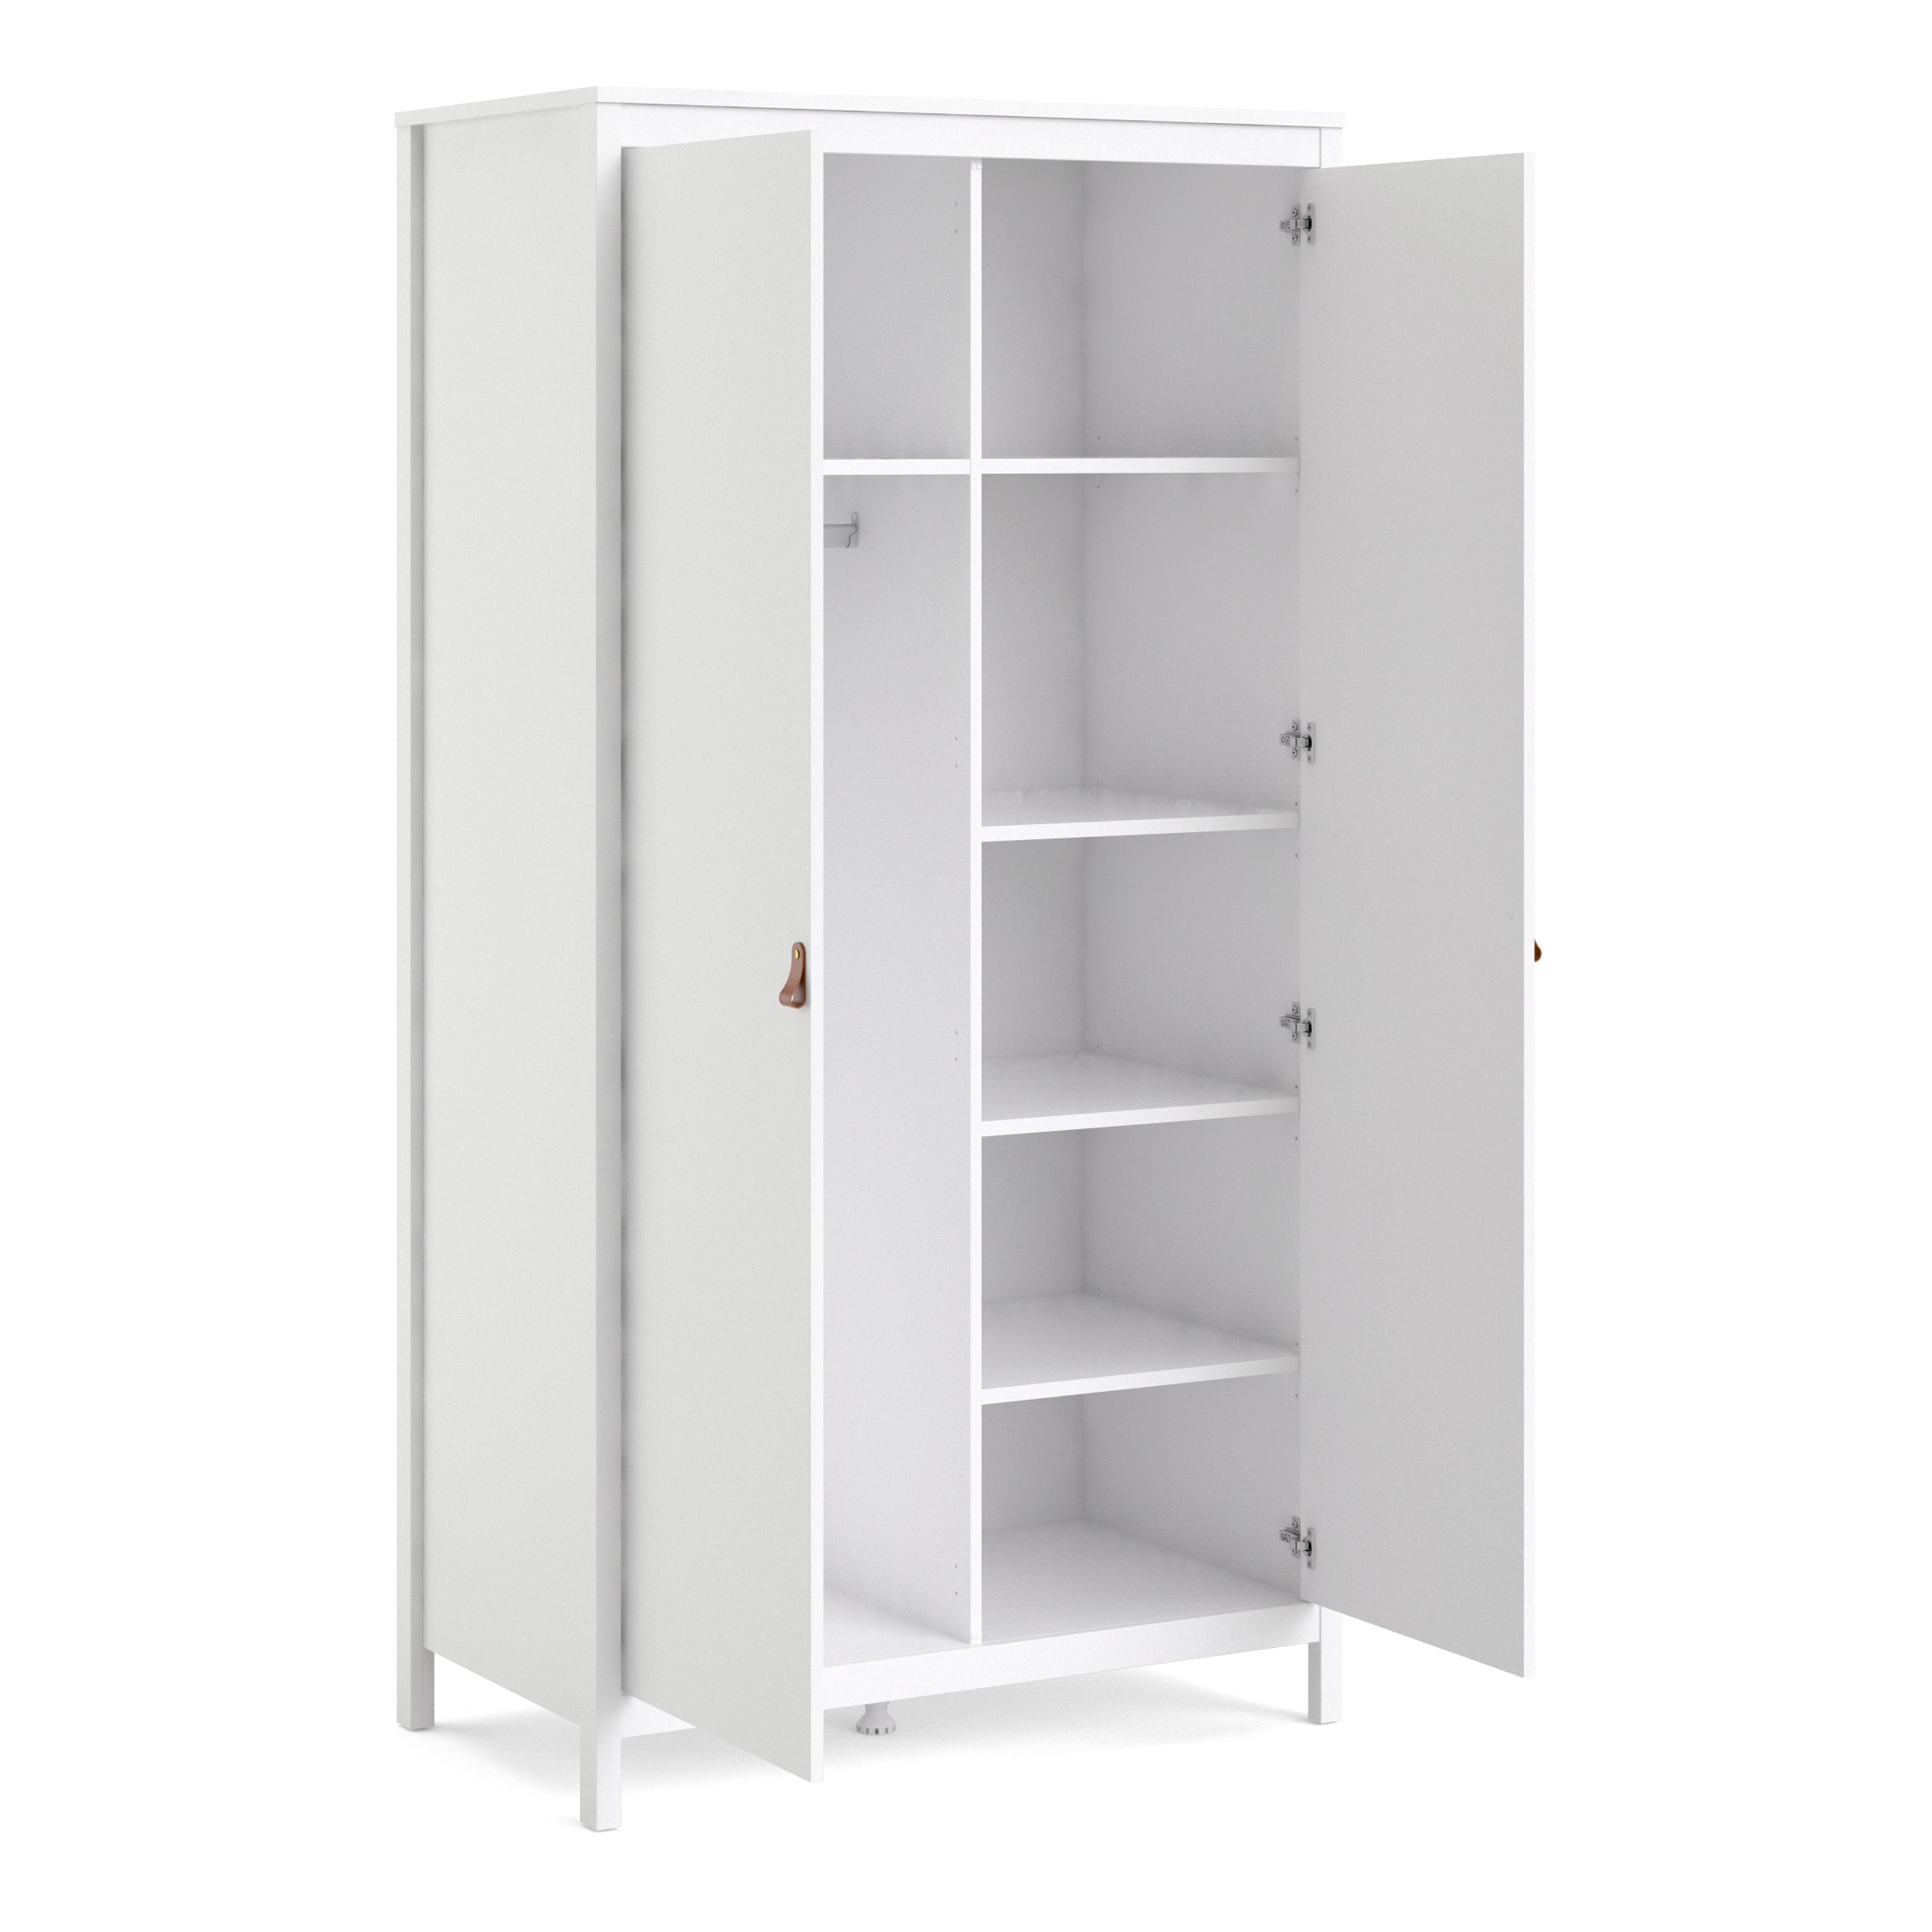 Barcelona Wardrobe with 2 Doors in White Furniture To Go Ltd